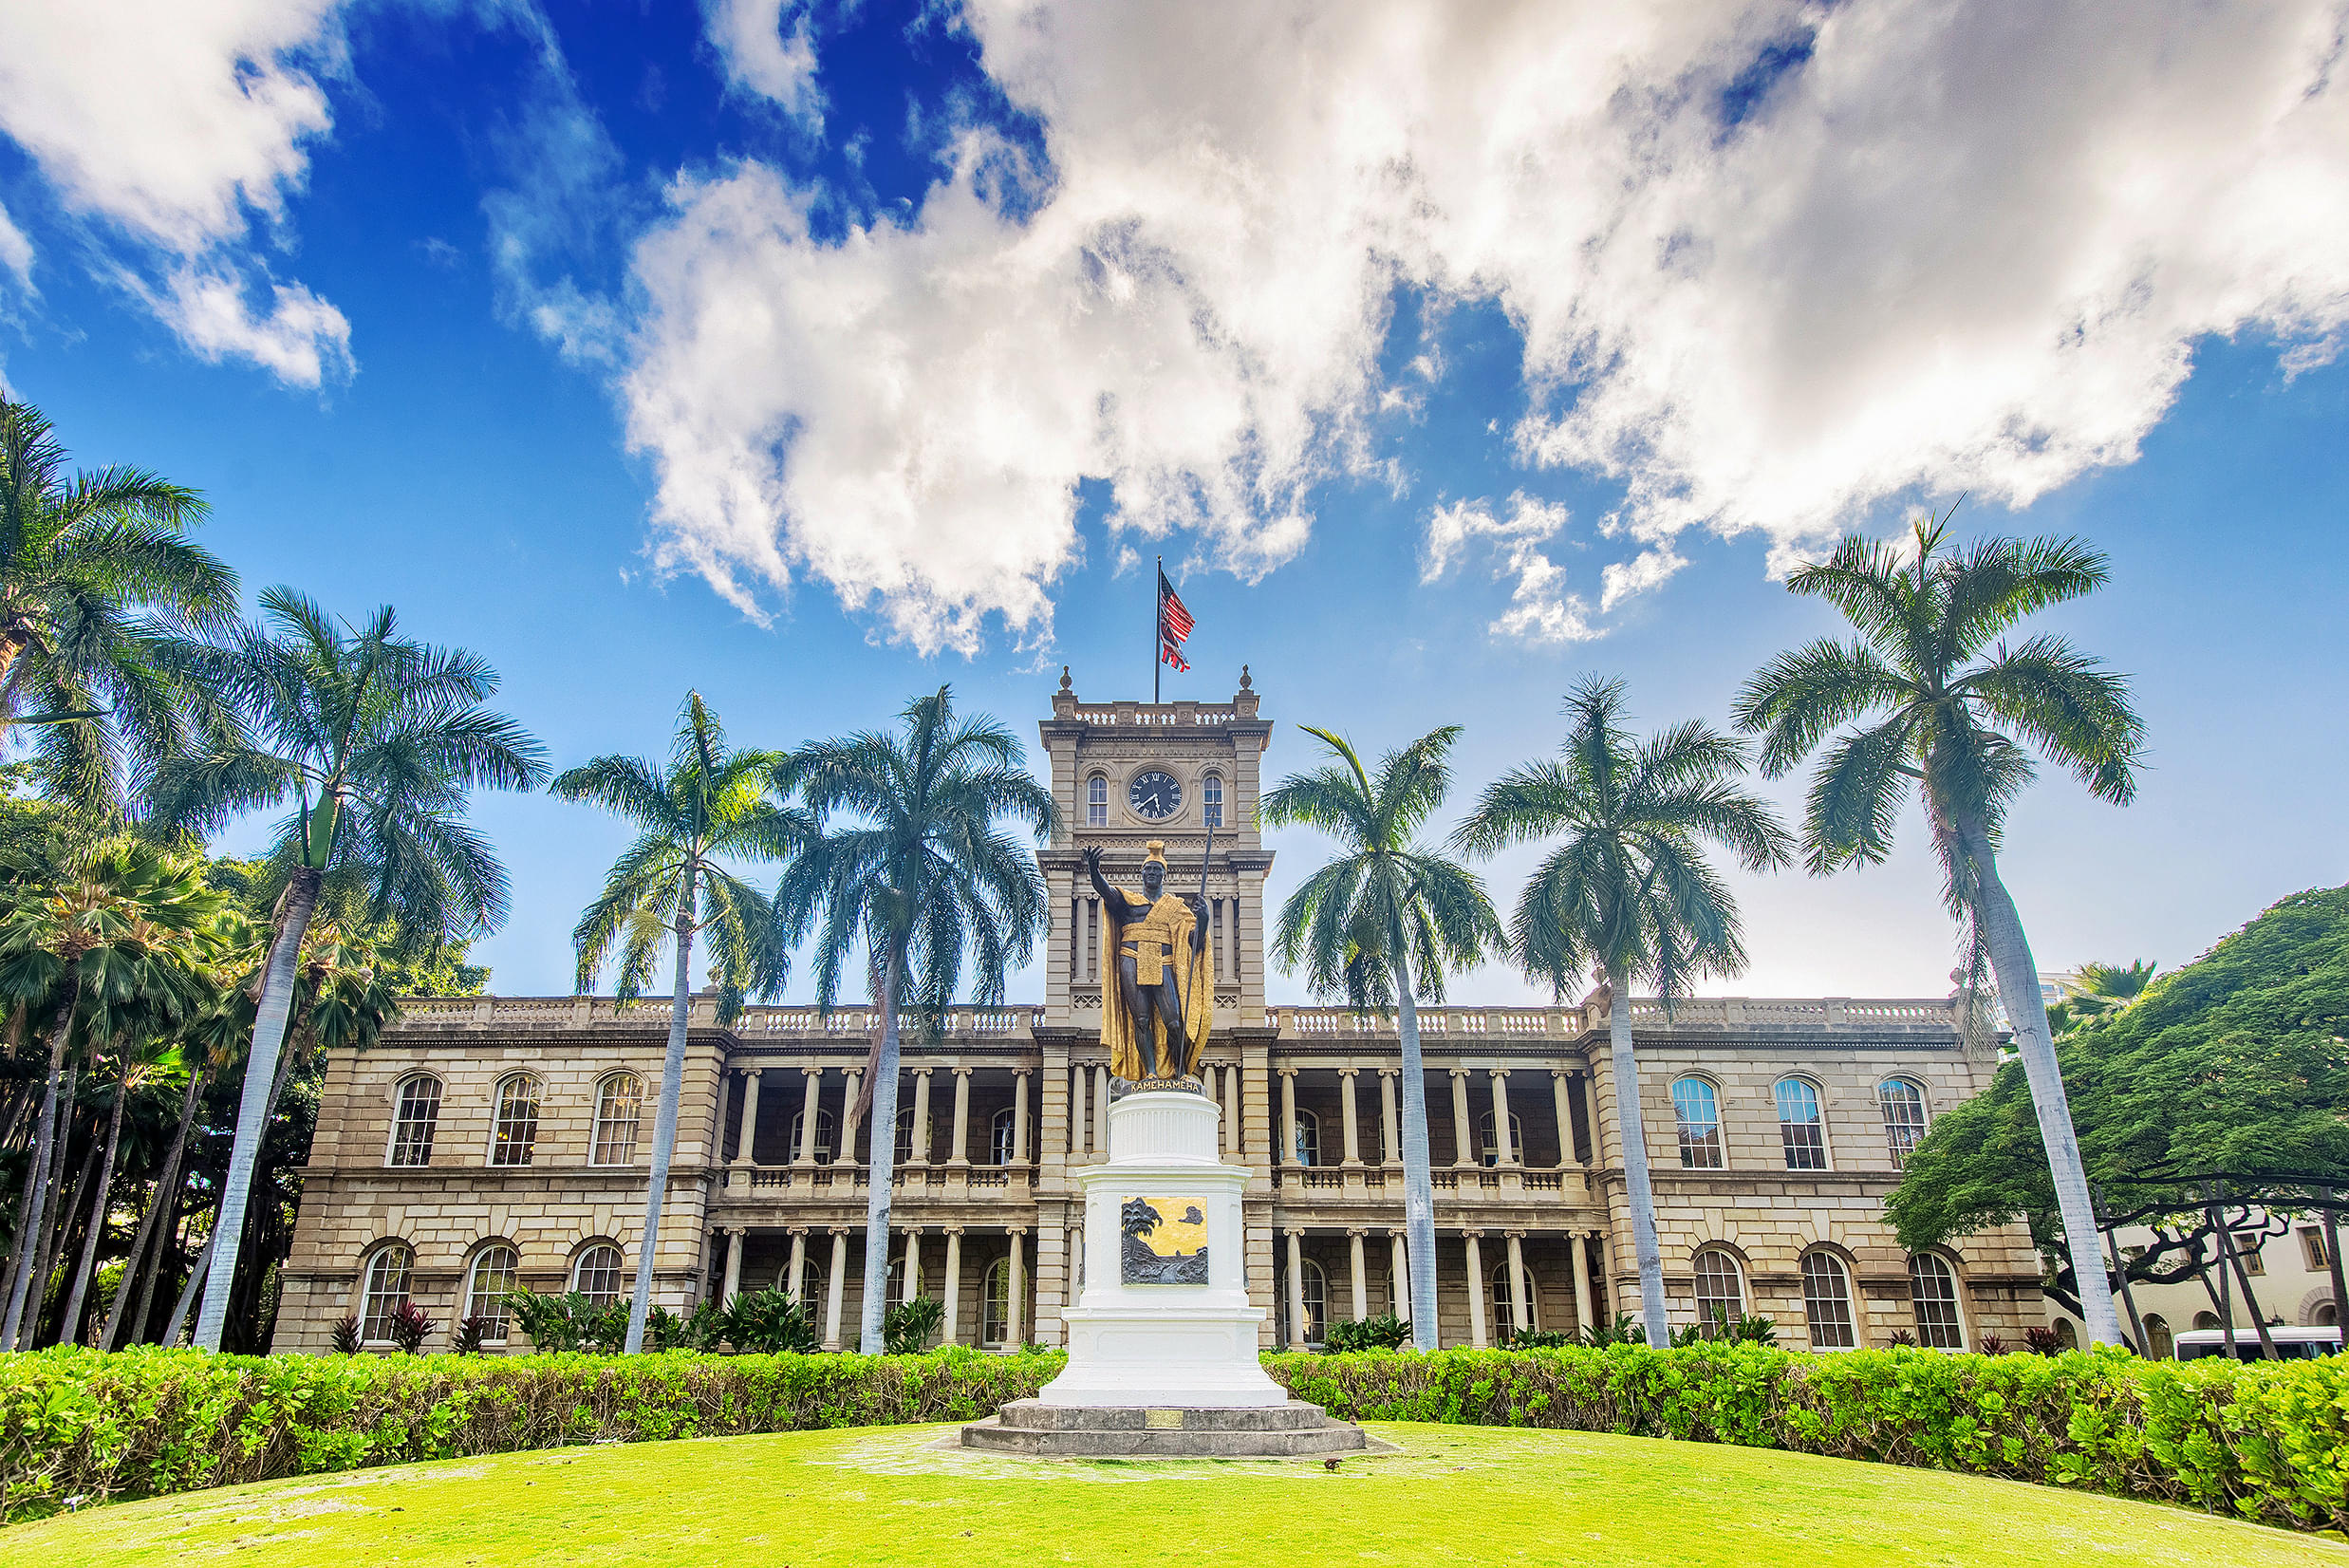 Iolani Palace Overview